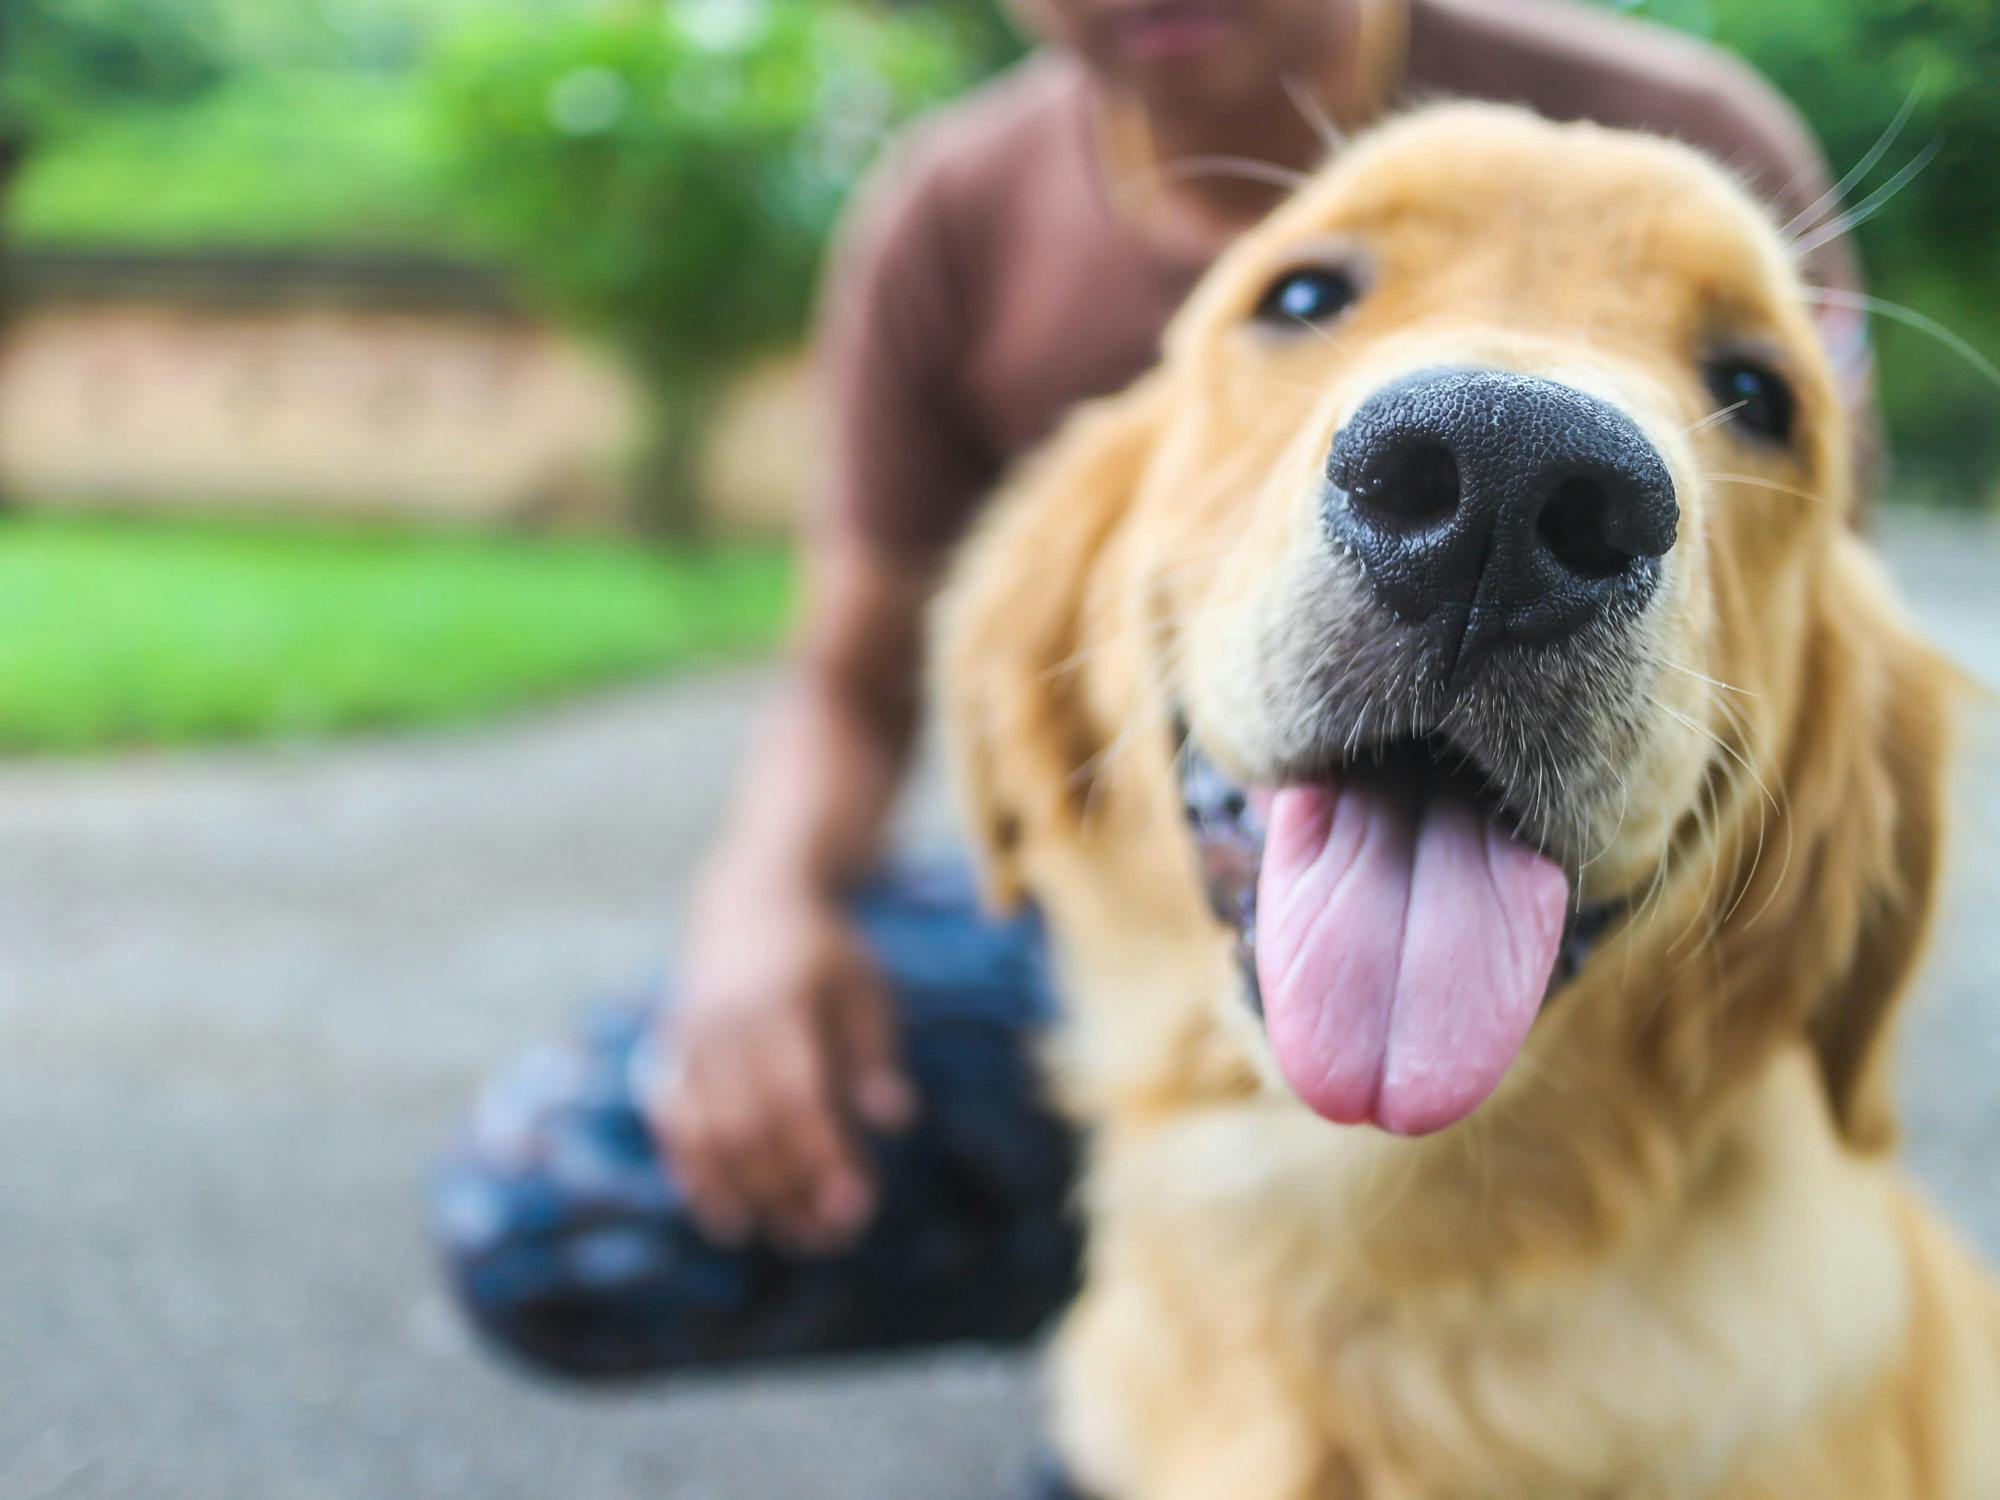 Dogs (Golden Retriever) can help soldiers with PTSD